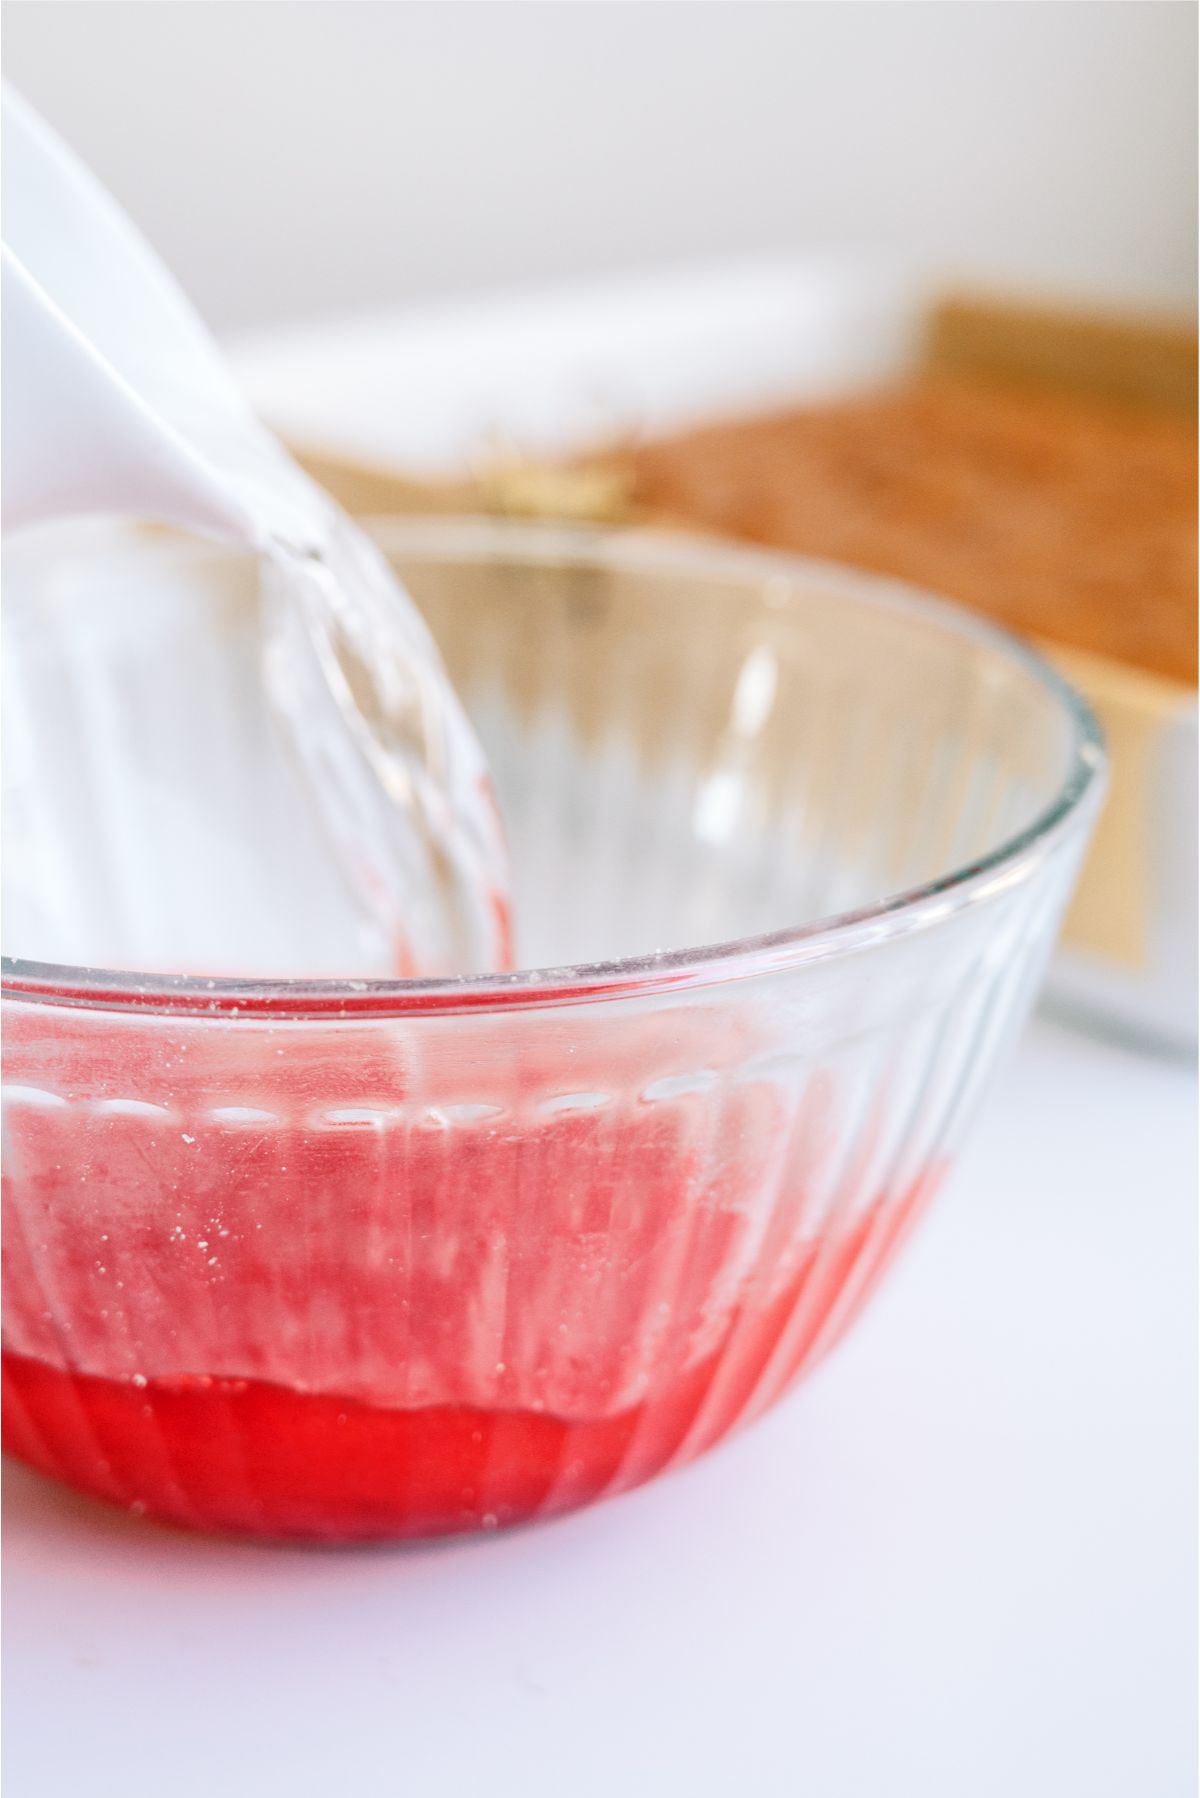 Hot water poured into a mixing bowl with jello mix